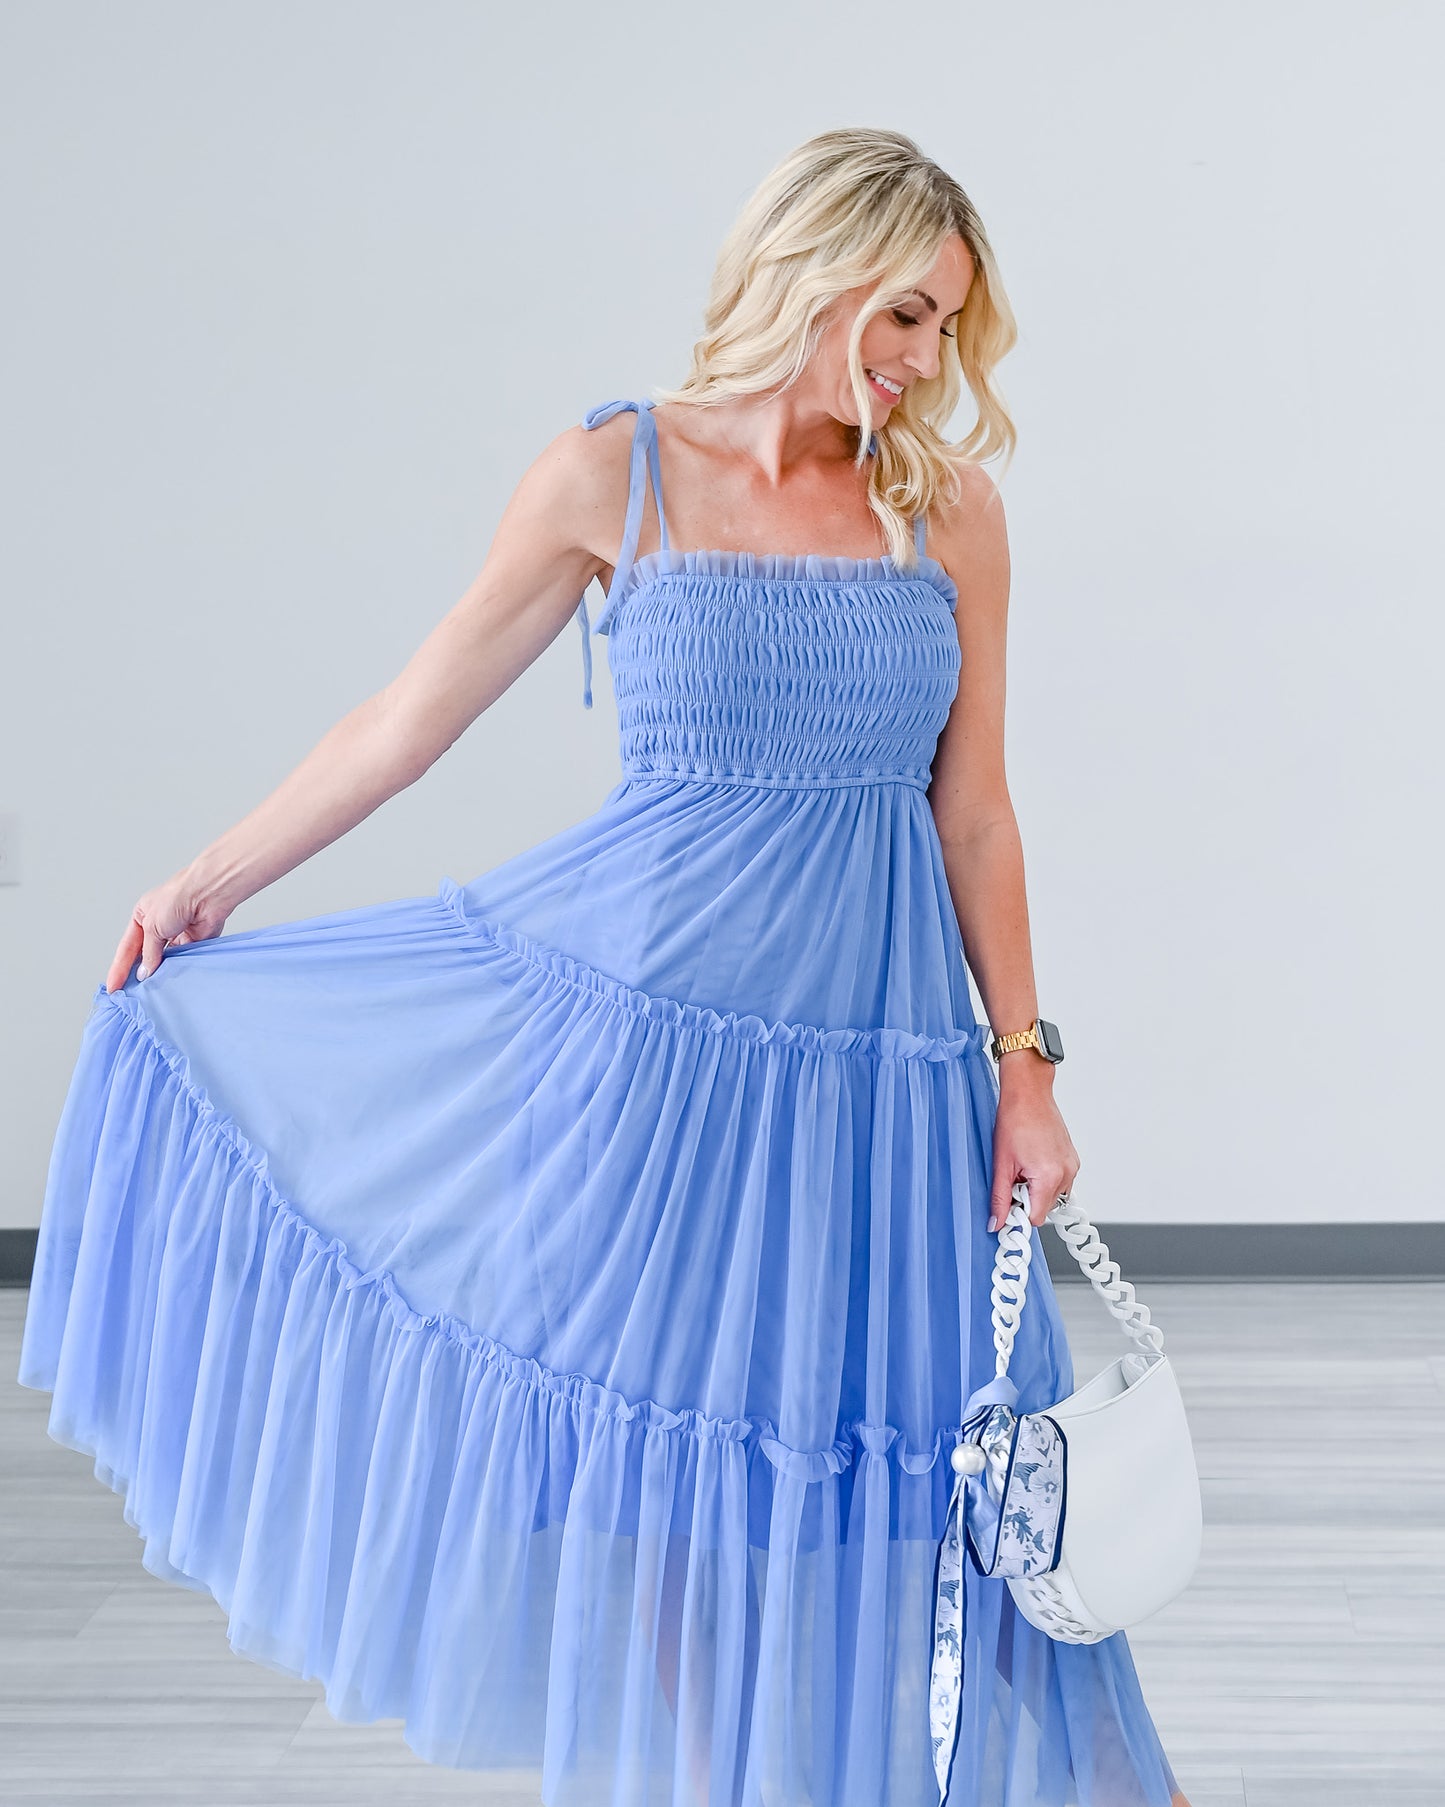 Say "Yes" Tulle Dress